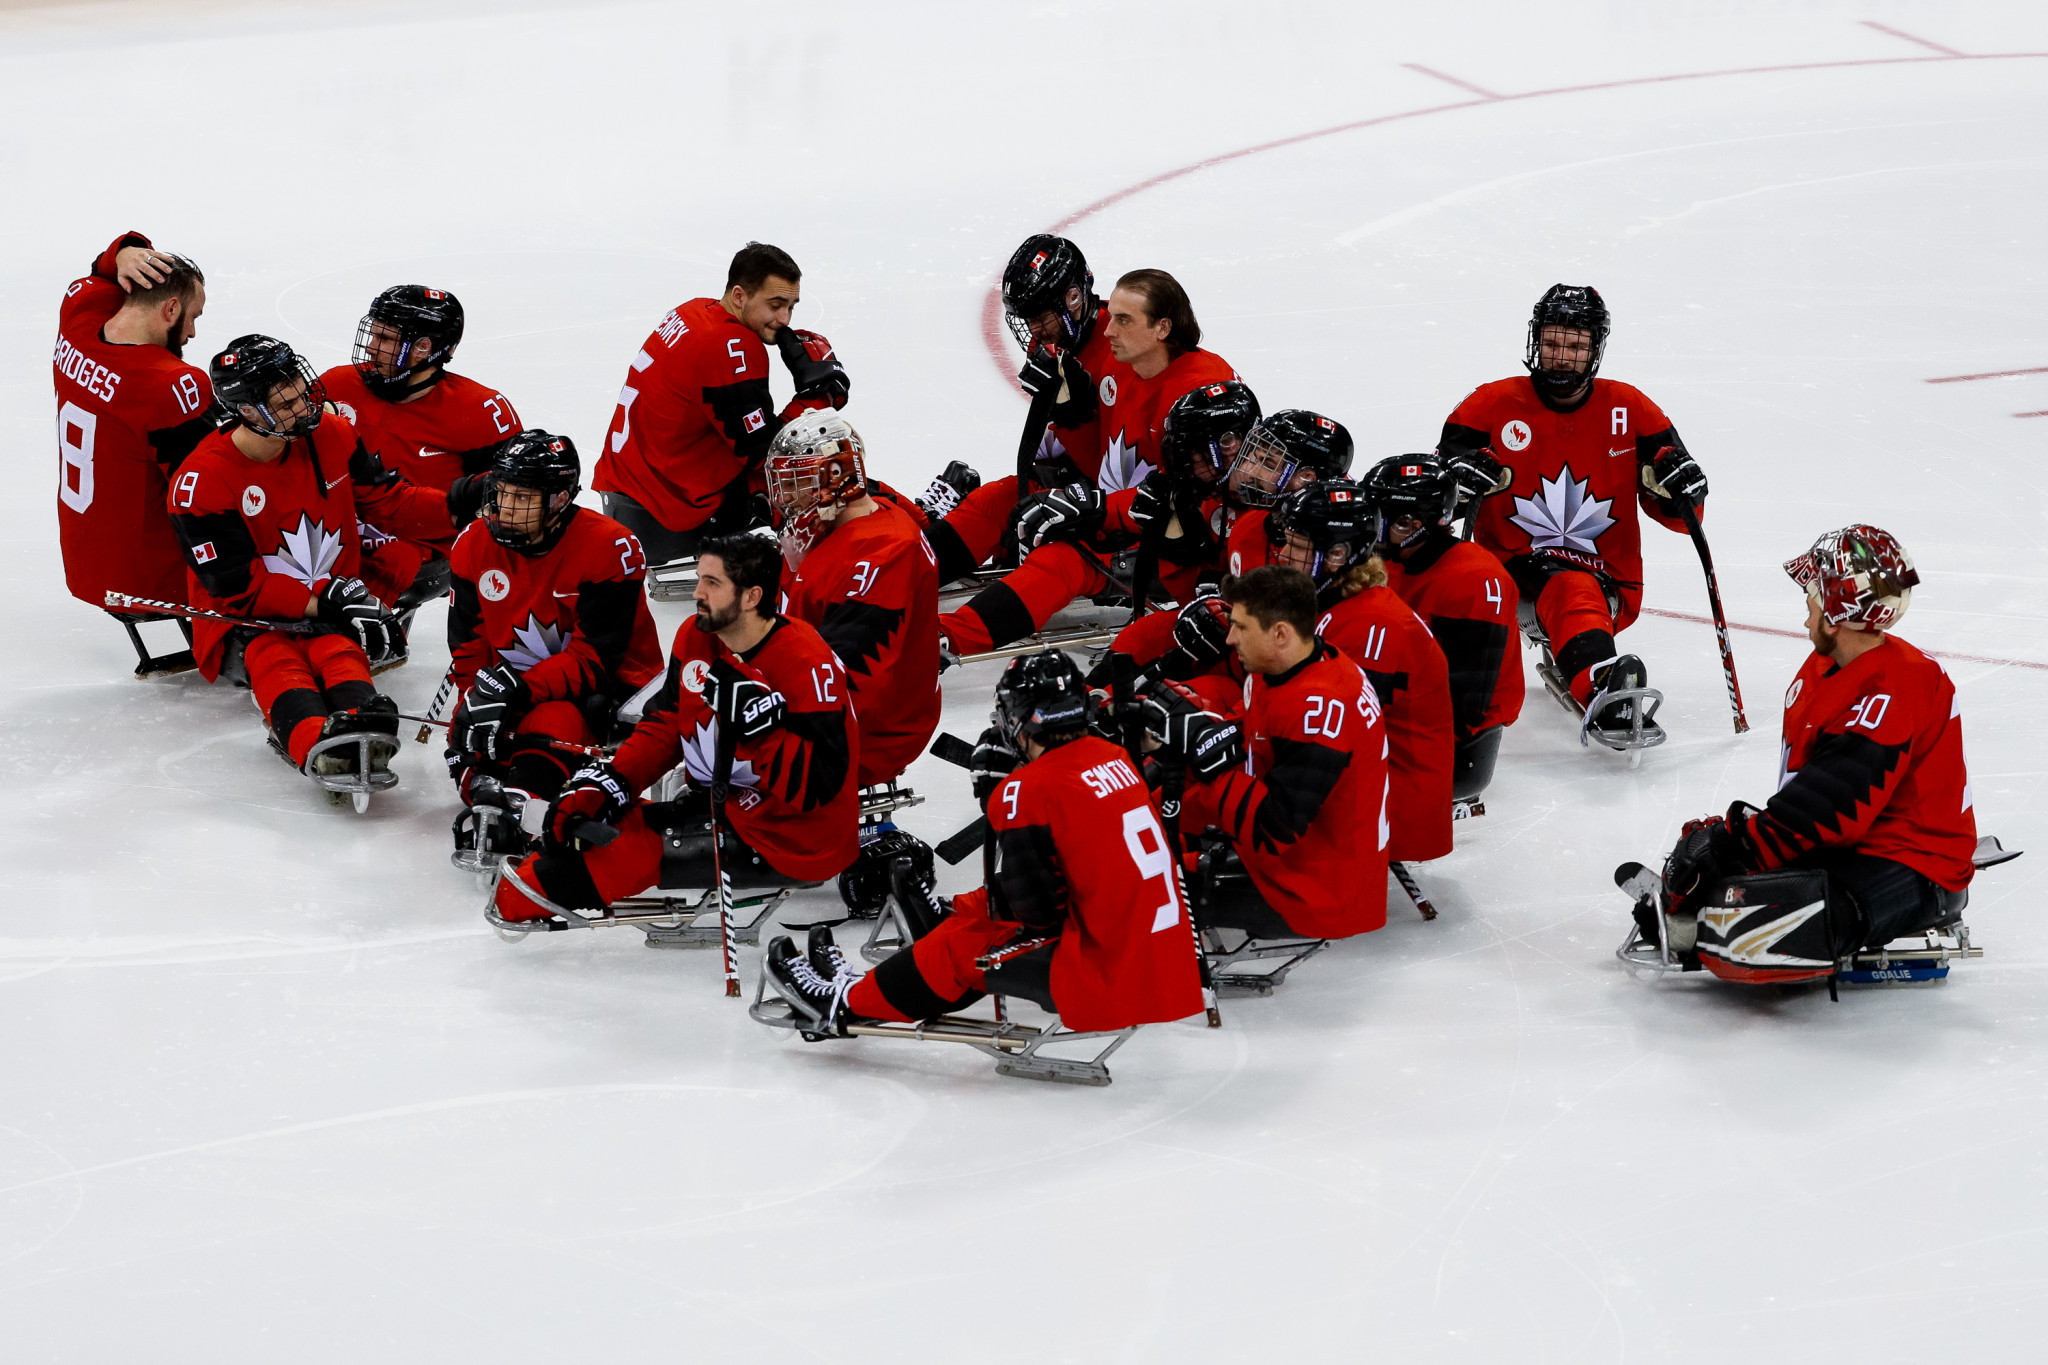 Canada won silver in Para ice hockey at the Winter Paralympics in Pyeongchang four years ago ©Getty Images